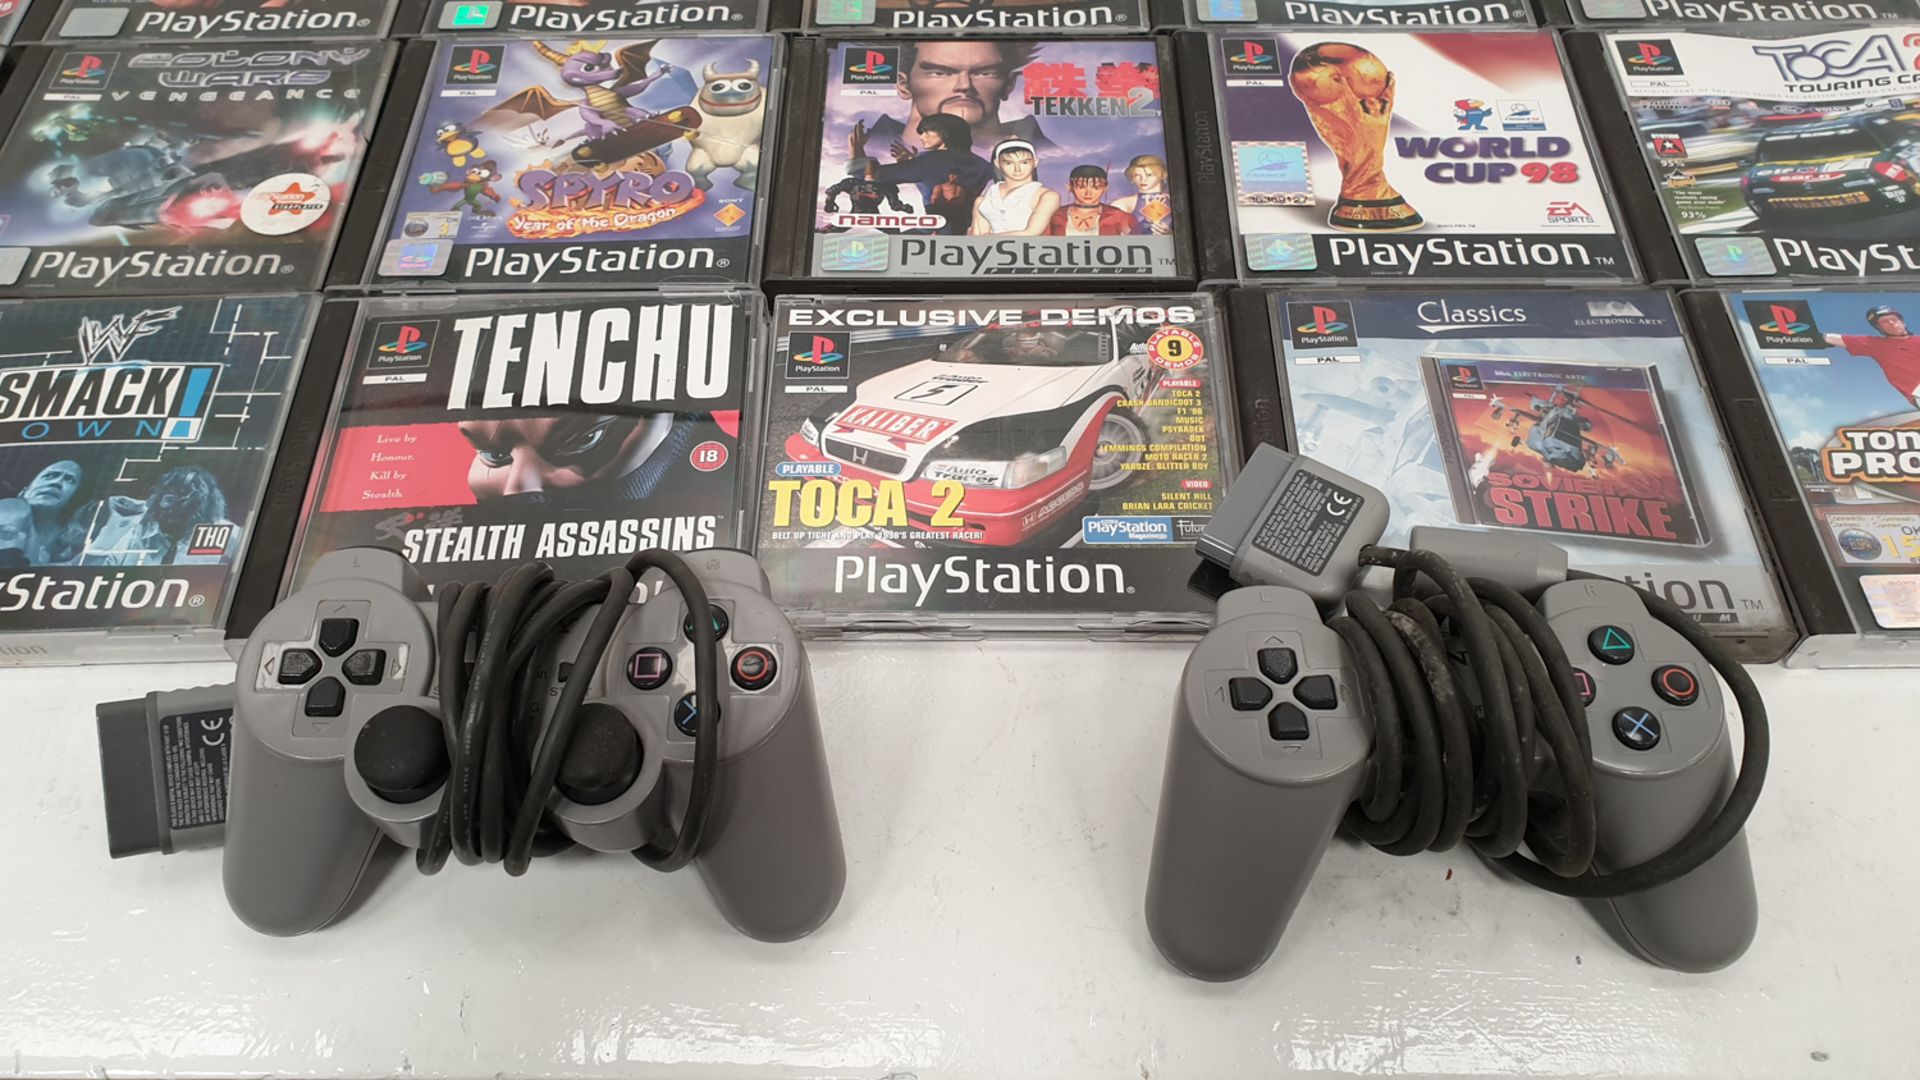 Large Selection of Playstation 1 Games including 2 x Controllers. - Image 5 of 6